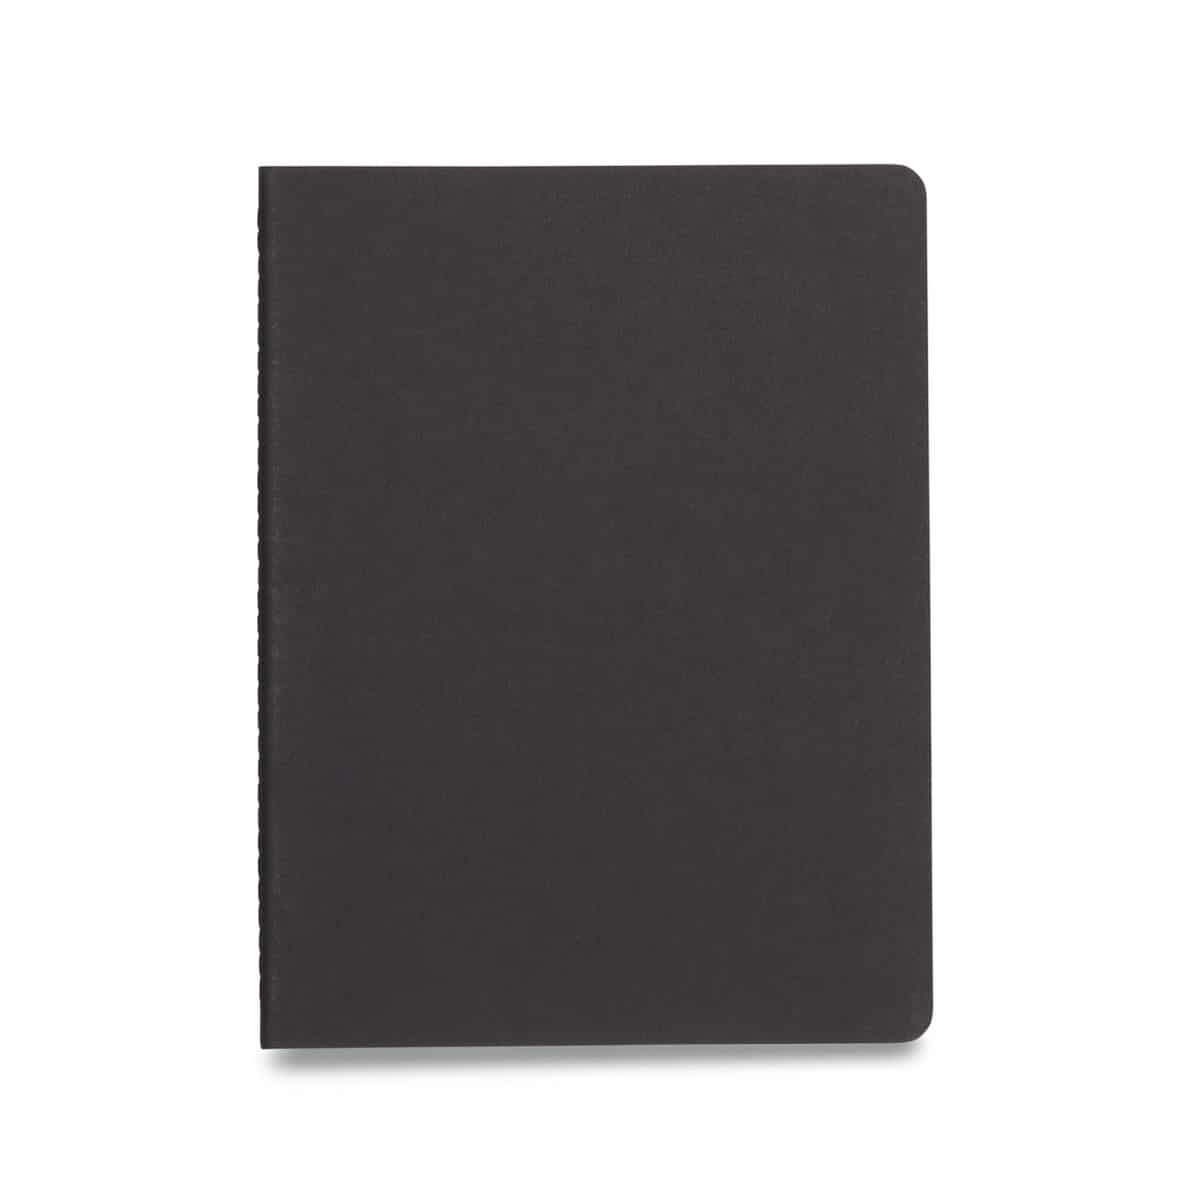 Moleskine Cahier Journals - 7.5 x 9.75 inches - Individual Notebook - by Moleskine - K. A. Artist Shop